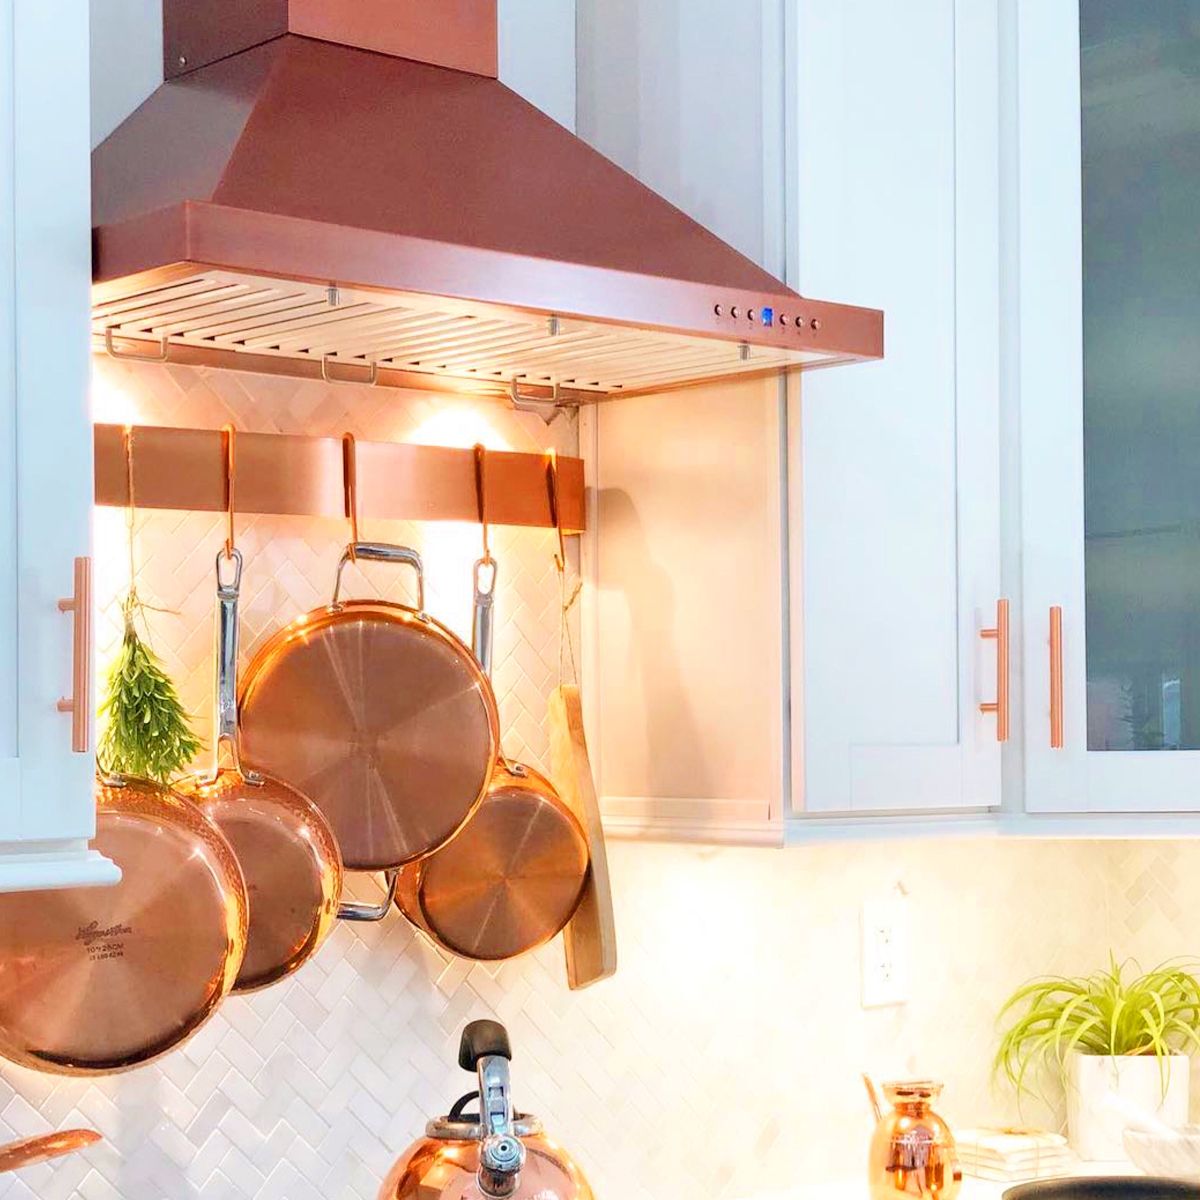 ZLINE Designer Series 7-Layer Copper Wall Mount Range Hood (8KBC) in a cottage kitchen with matching copper cookware.